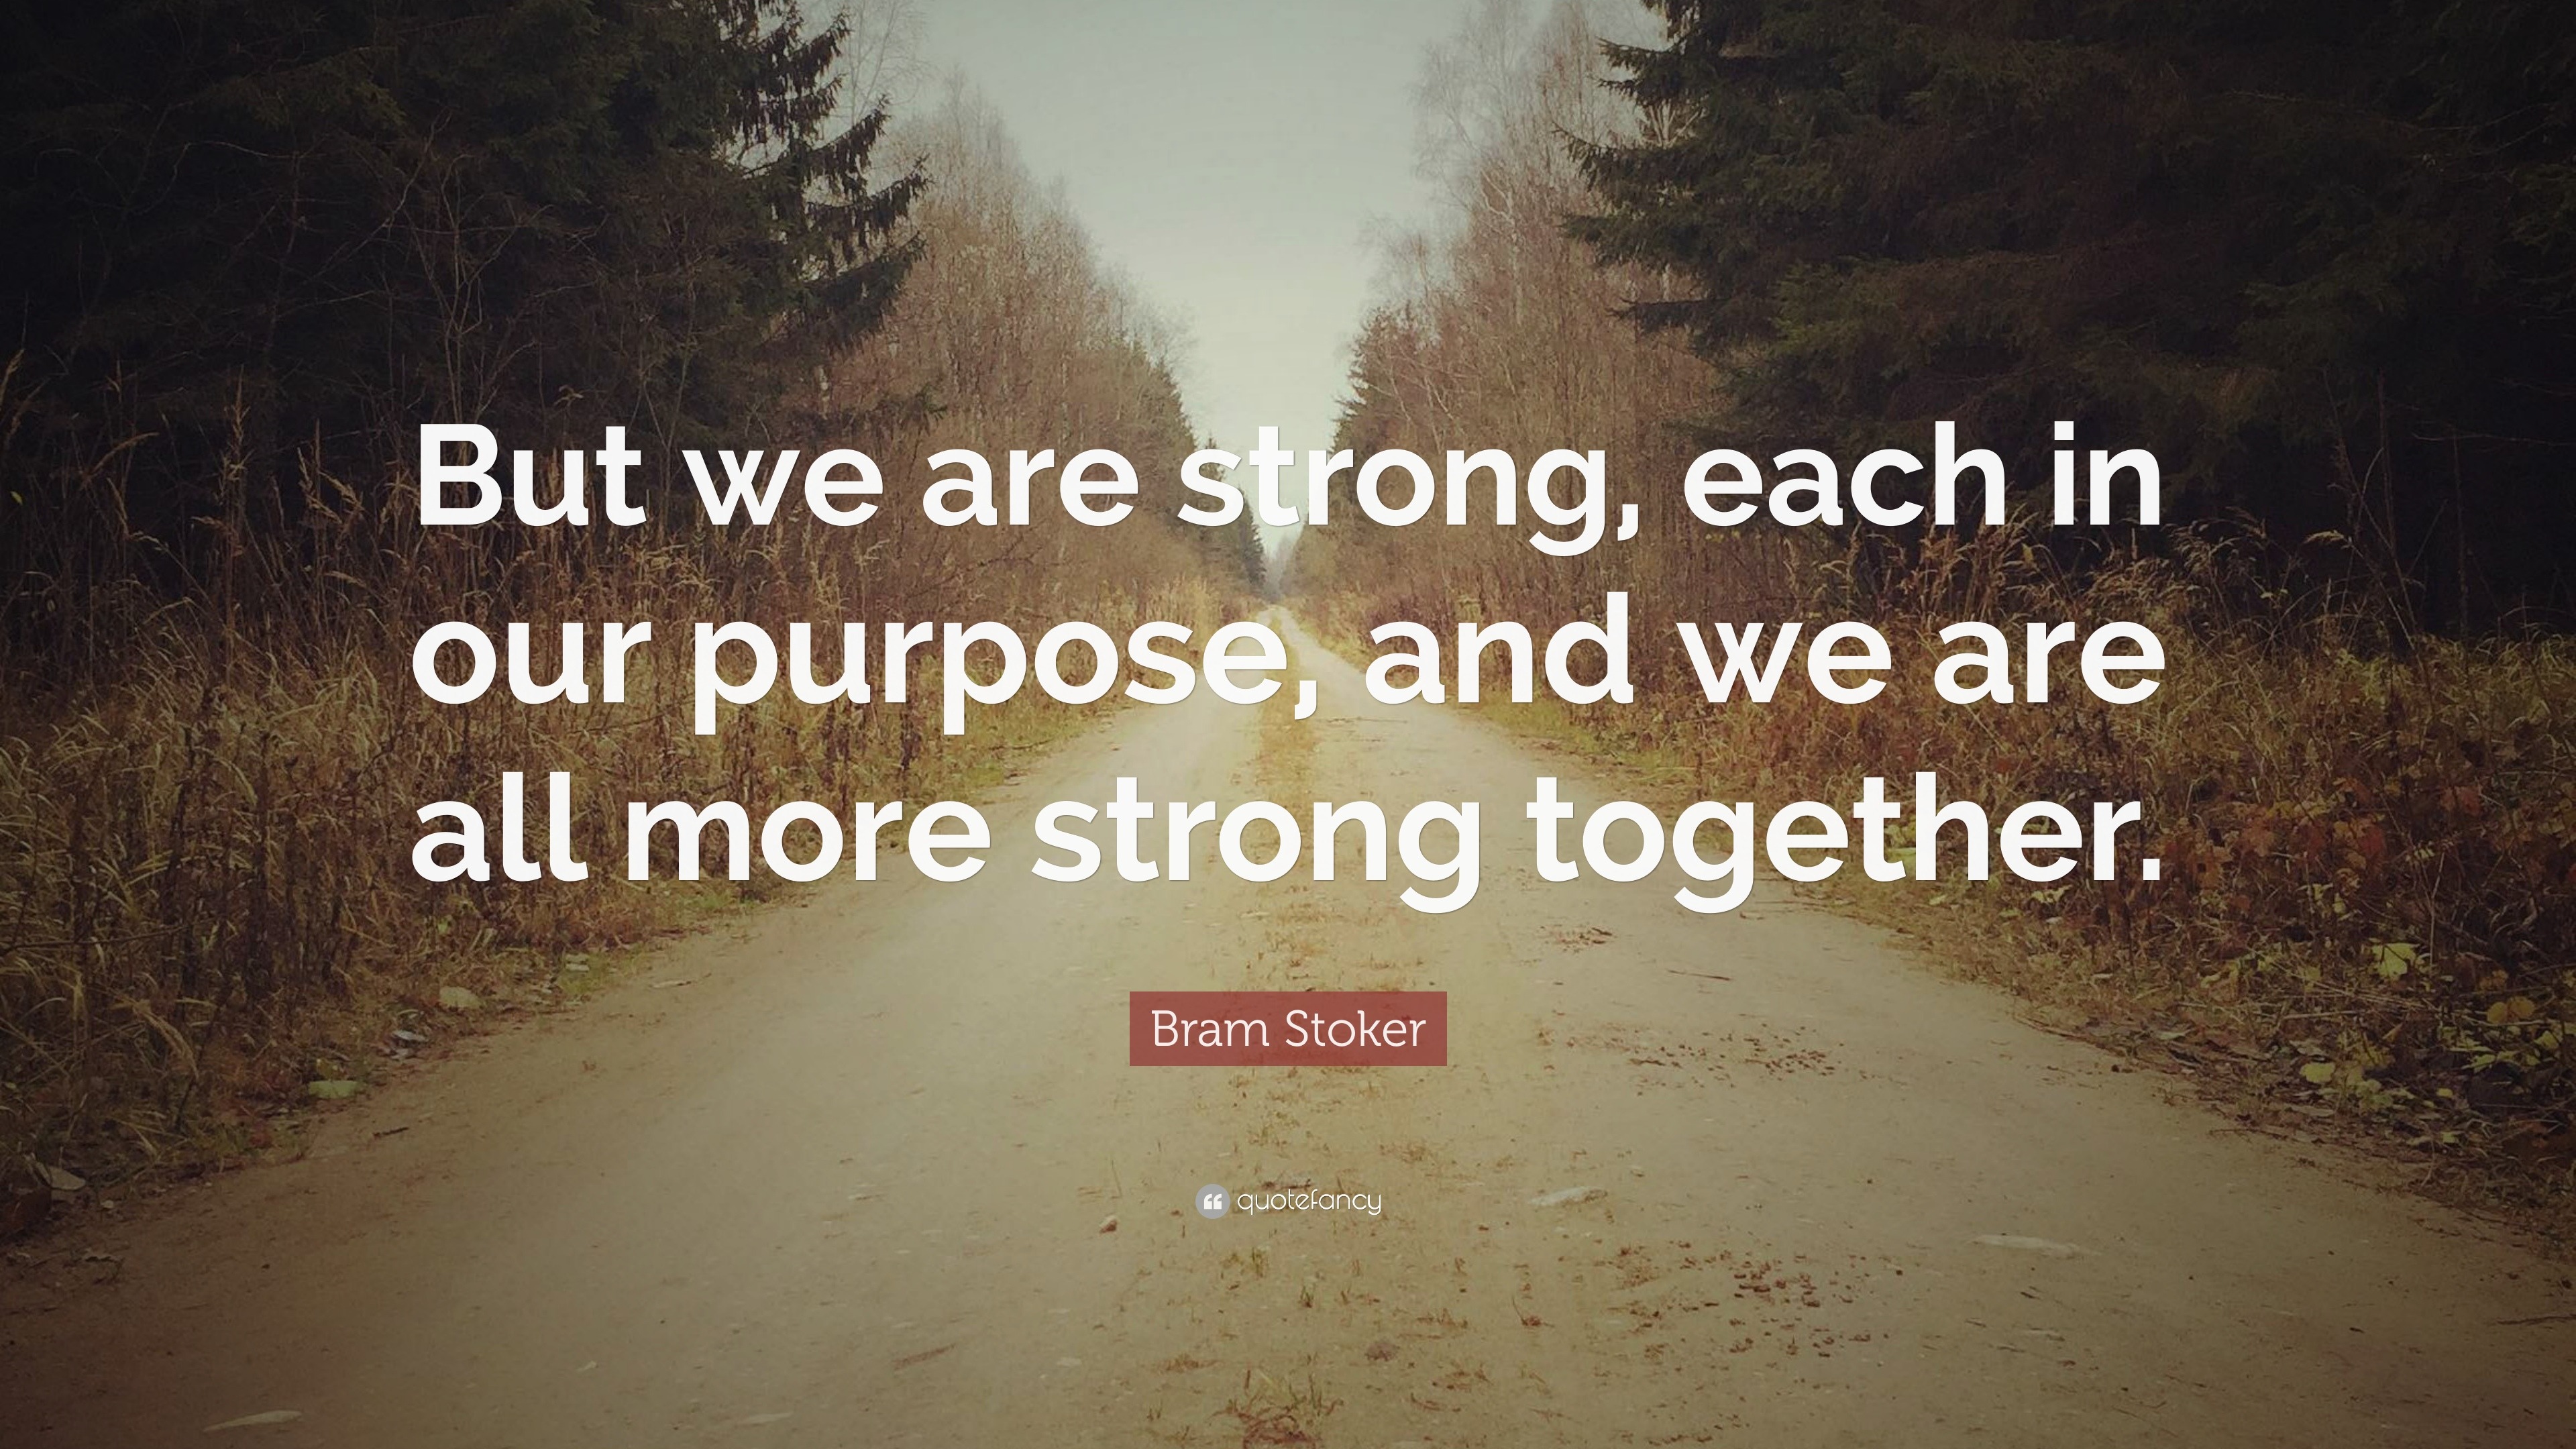 Bram Stoker Quote “but We Are Strong Each In Our Purpose And We Are All More Strong Together ”